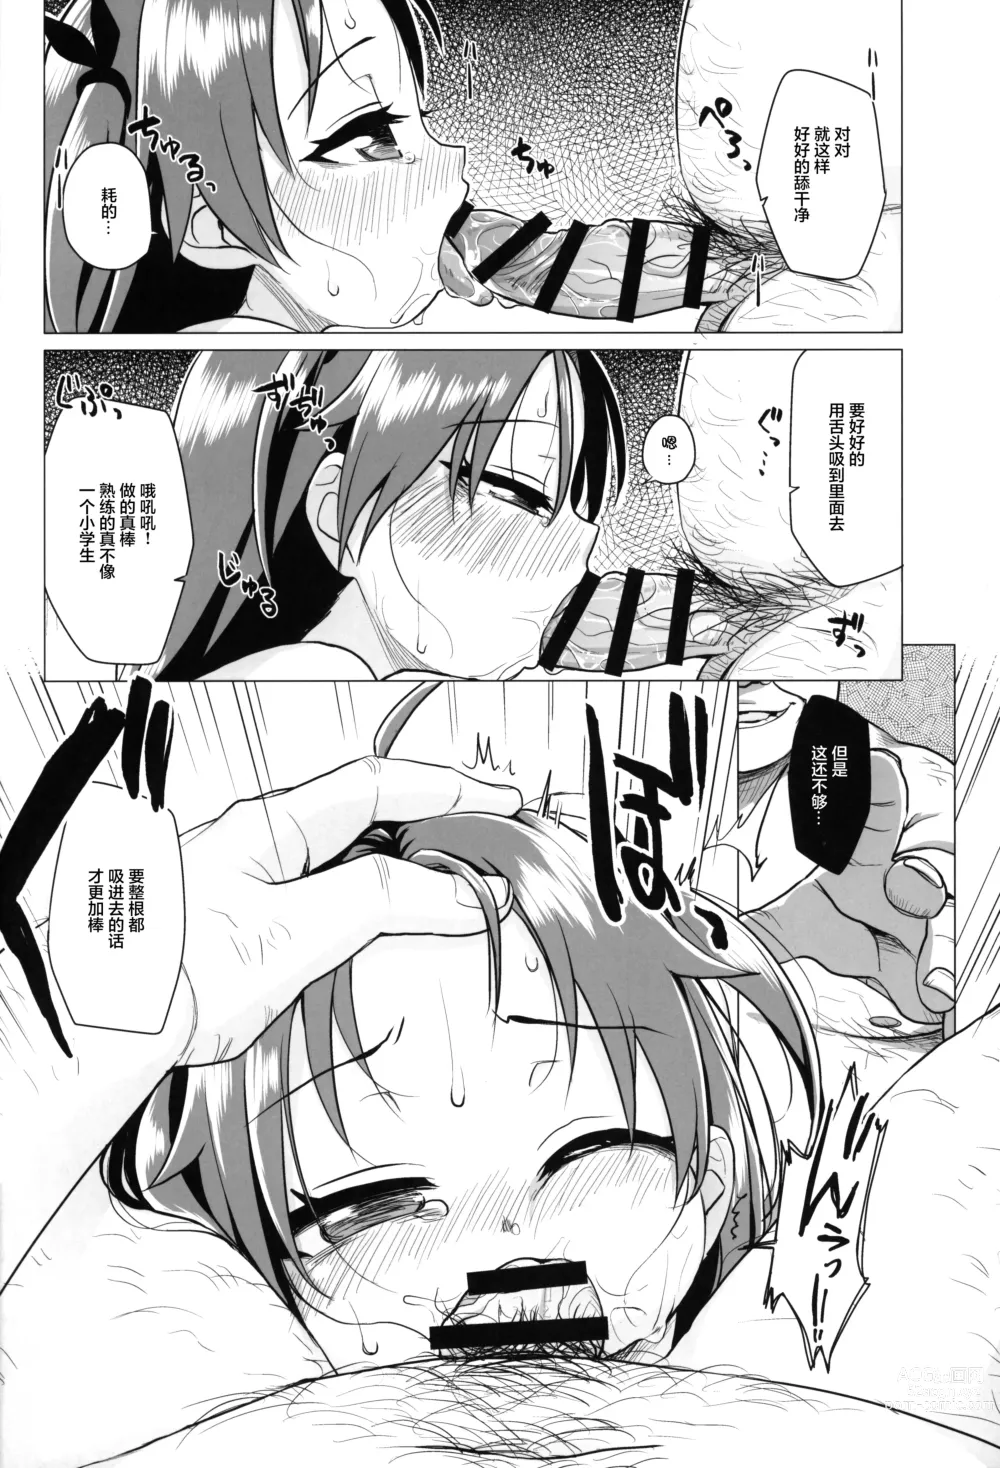 Page 17 of doujinshi 无法如愿的初恋